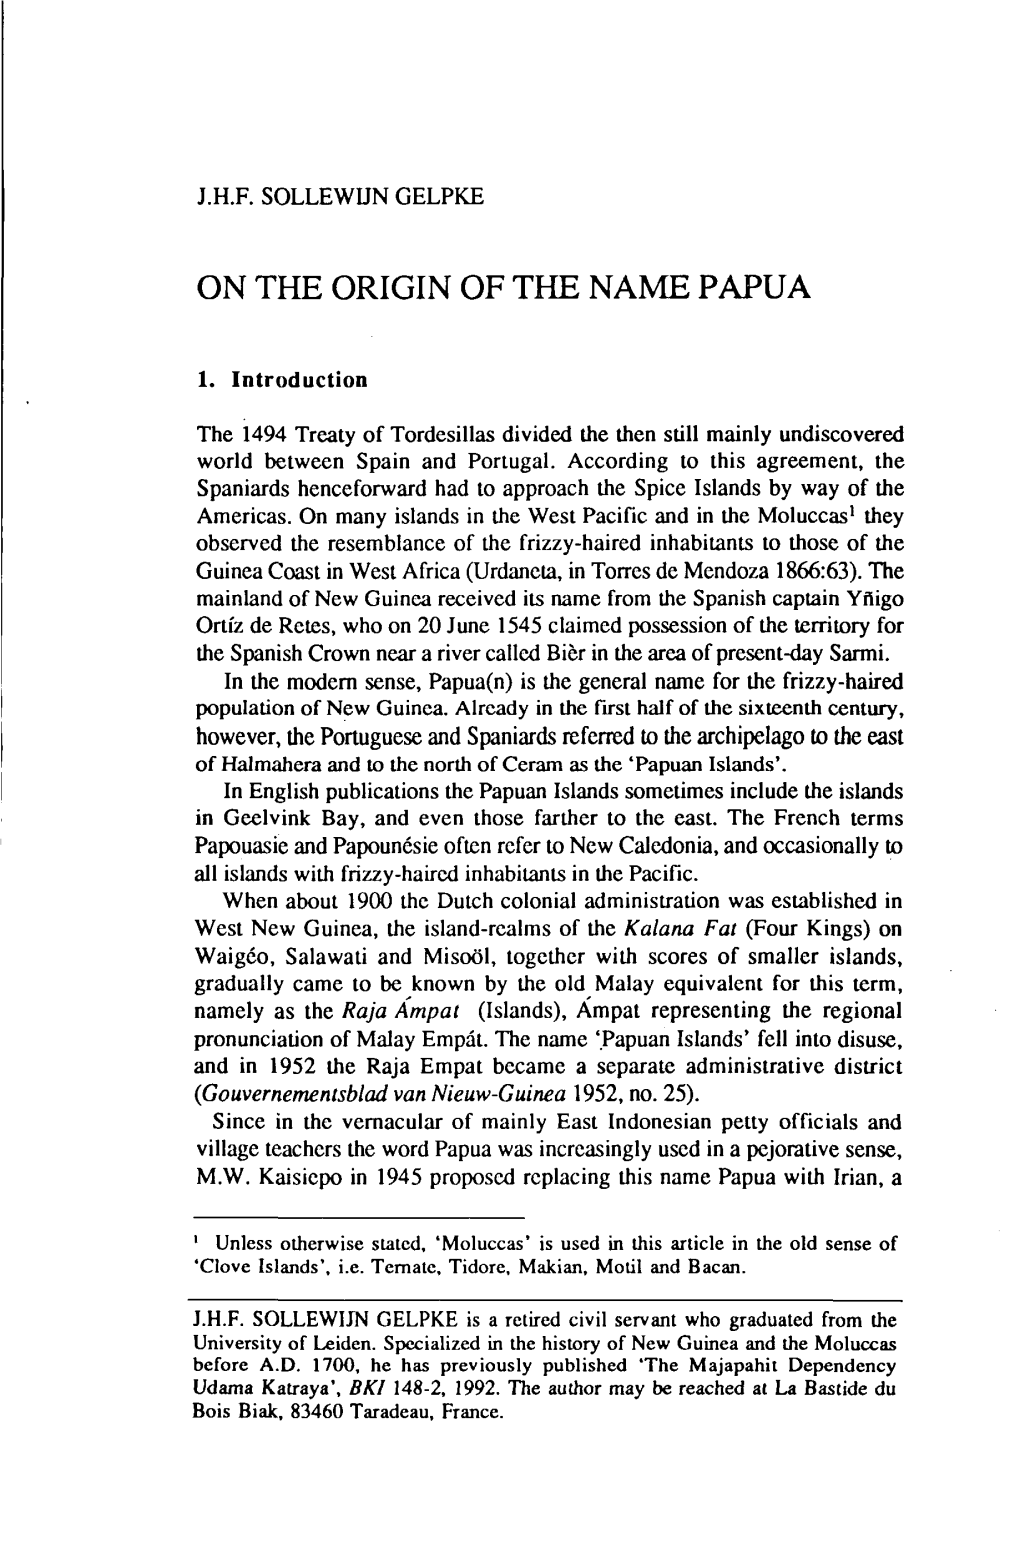 On the Origin of the Name Papua